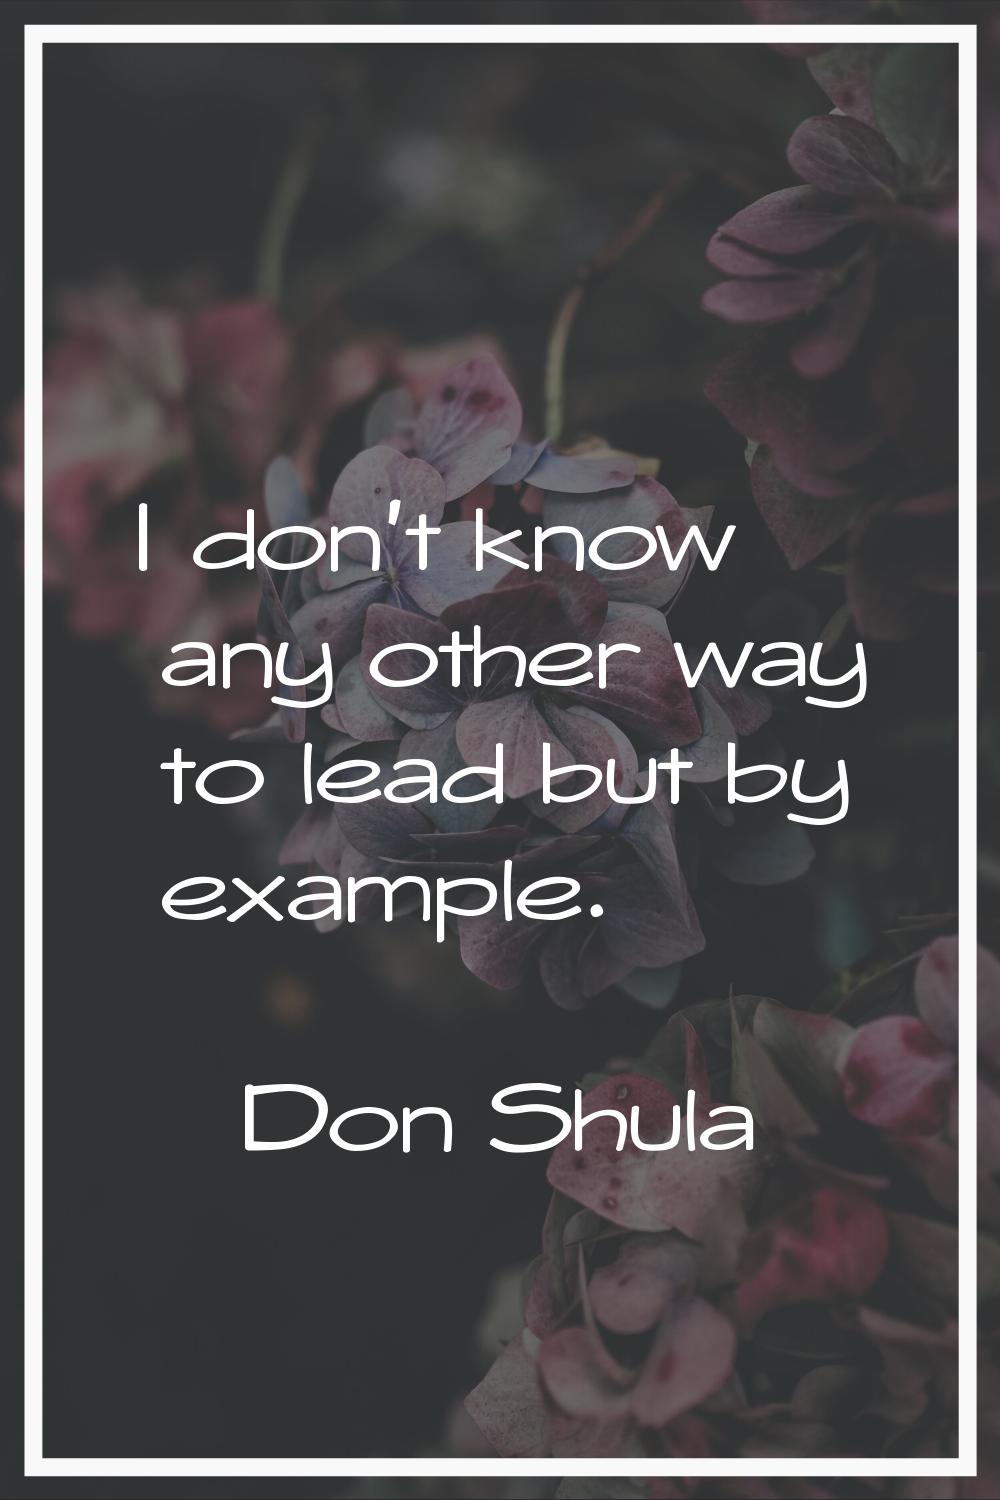 I don't know any other way to lead but by example.